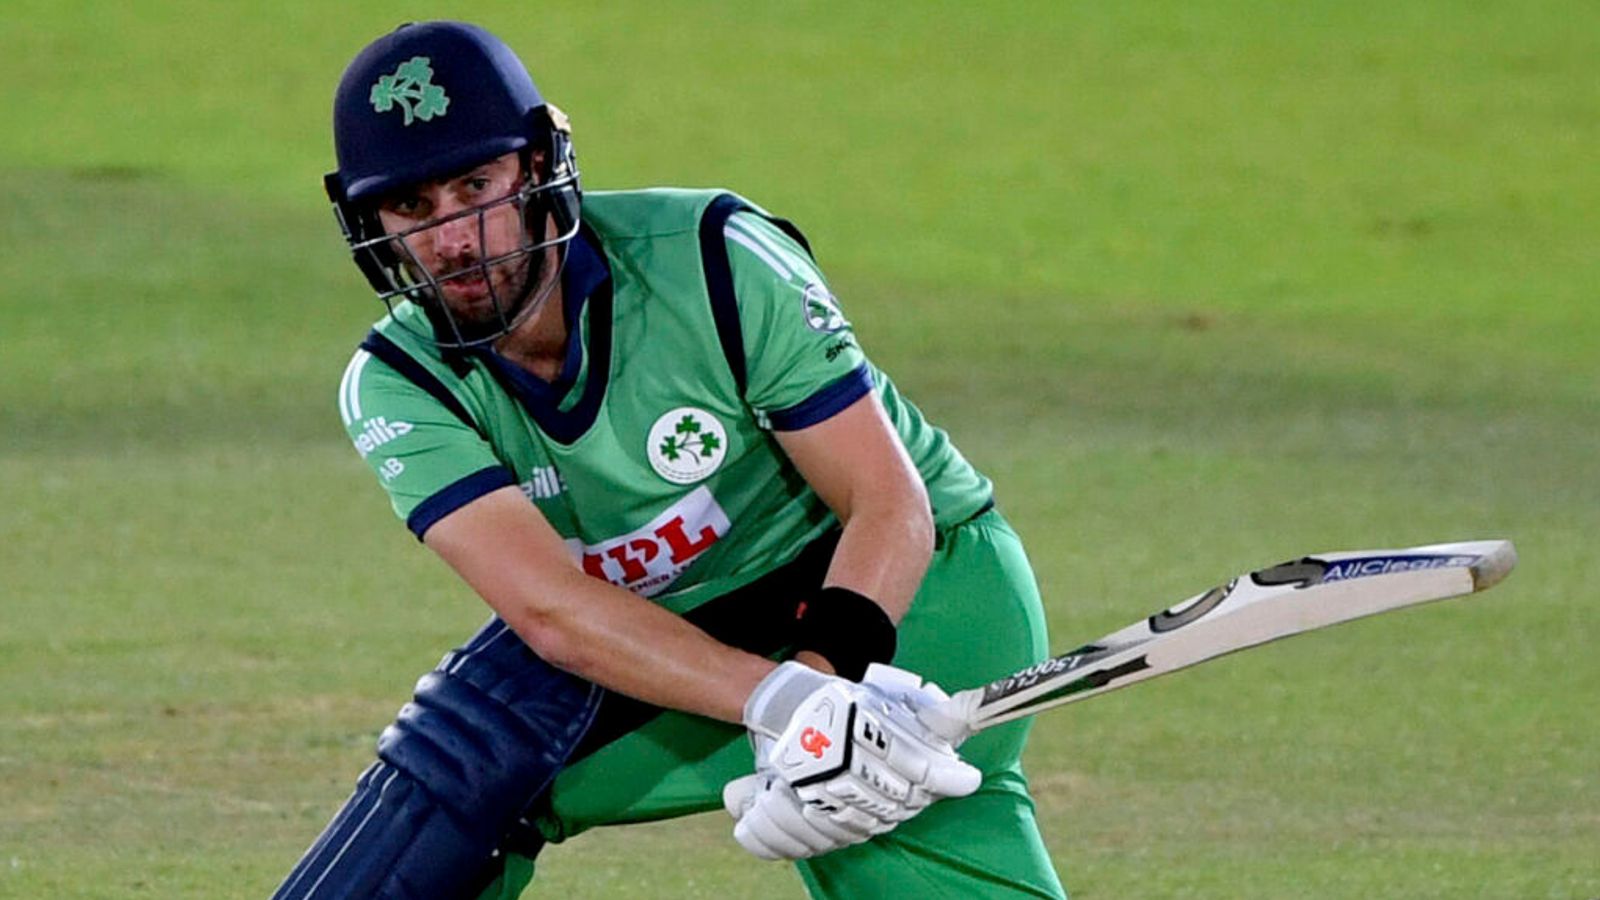 IND vs IRE LIVE: Paul Stirling, Andy Balbirnie amongst biggest threats for Hardik Pandya and Co - Check 5 Ireland players to watch out for